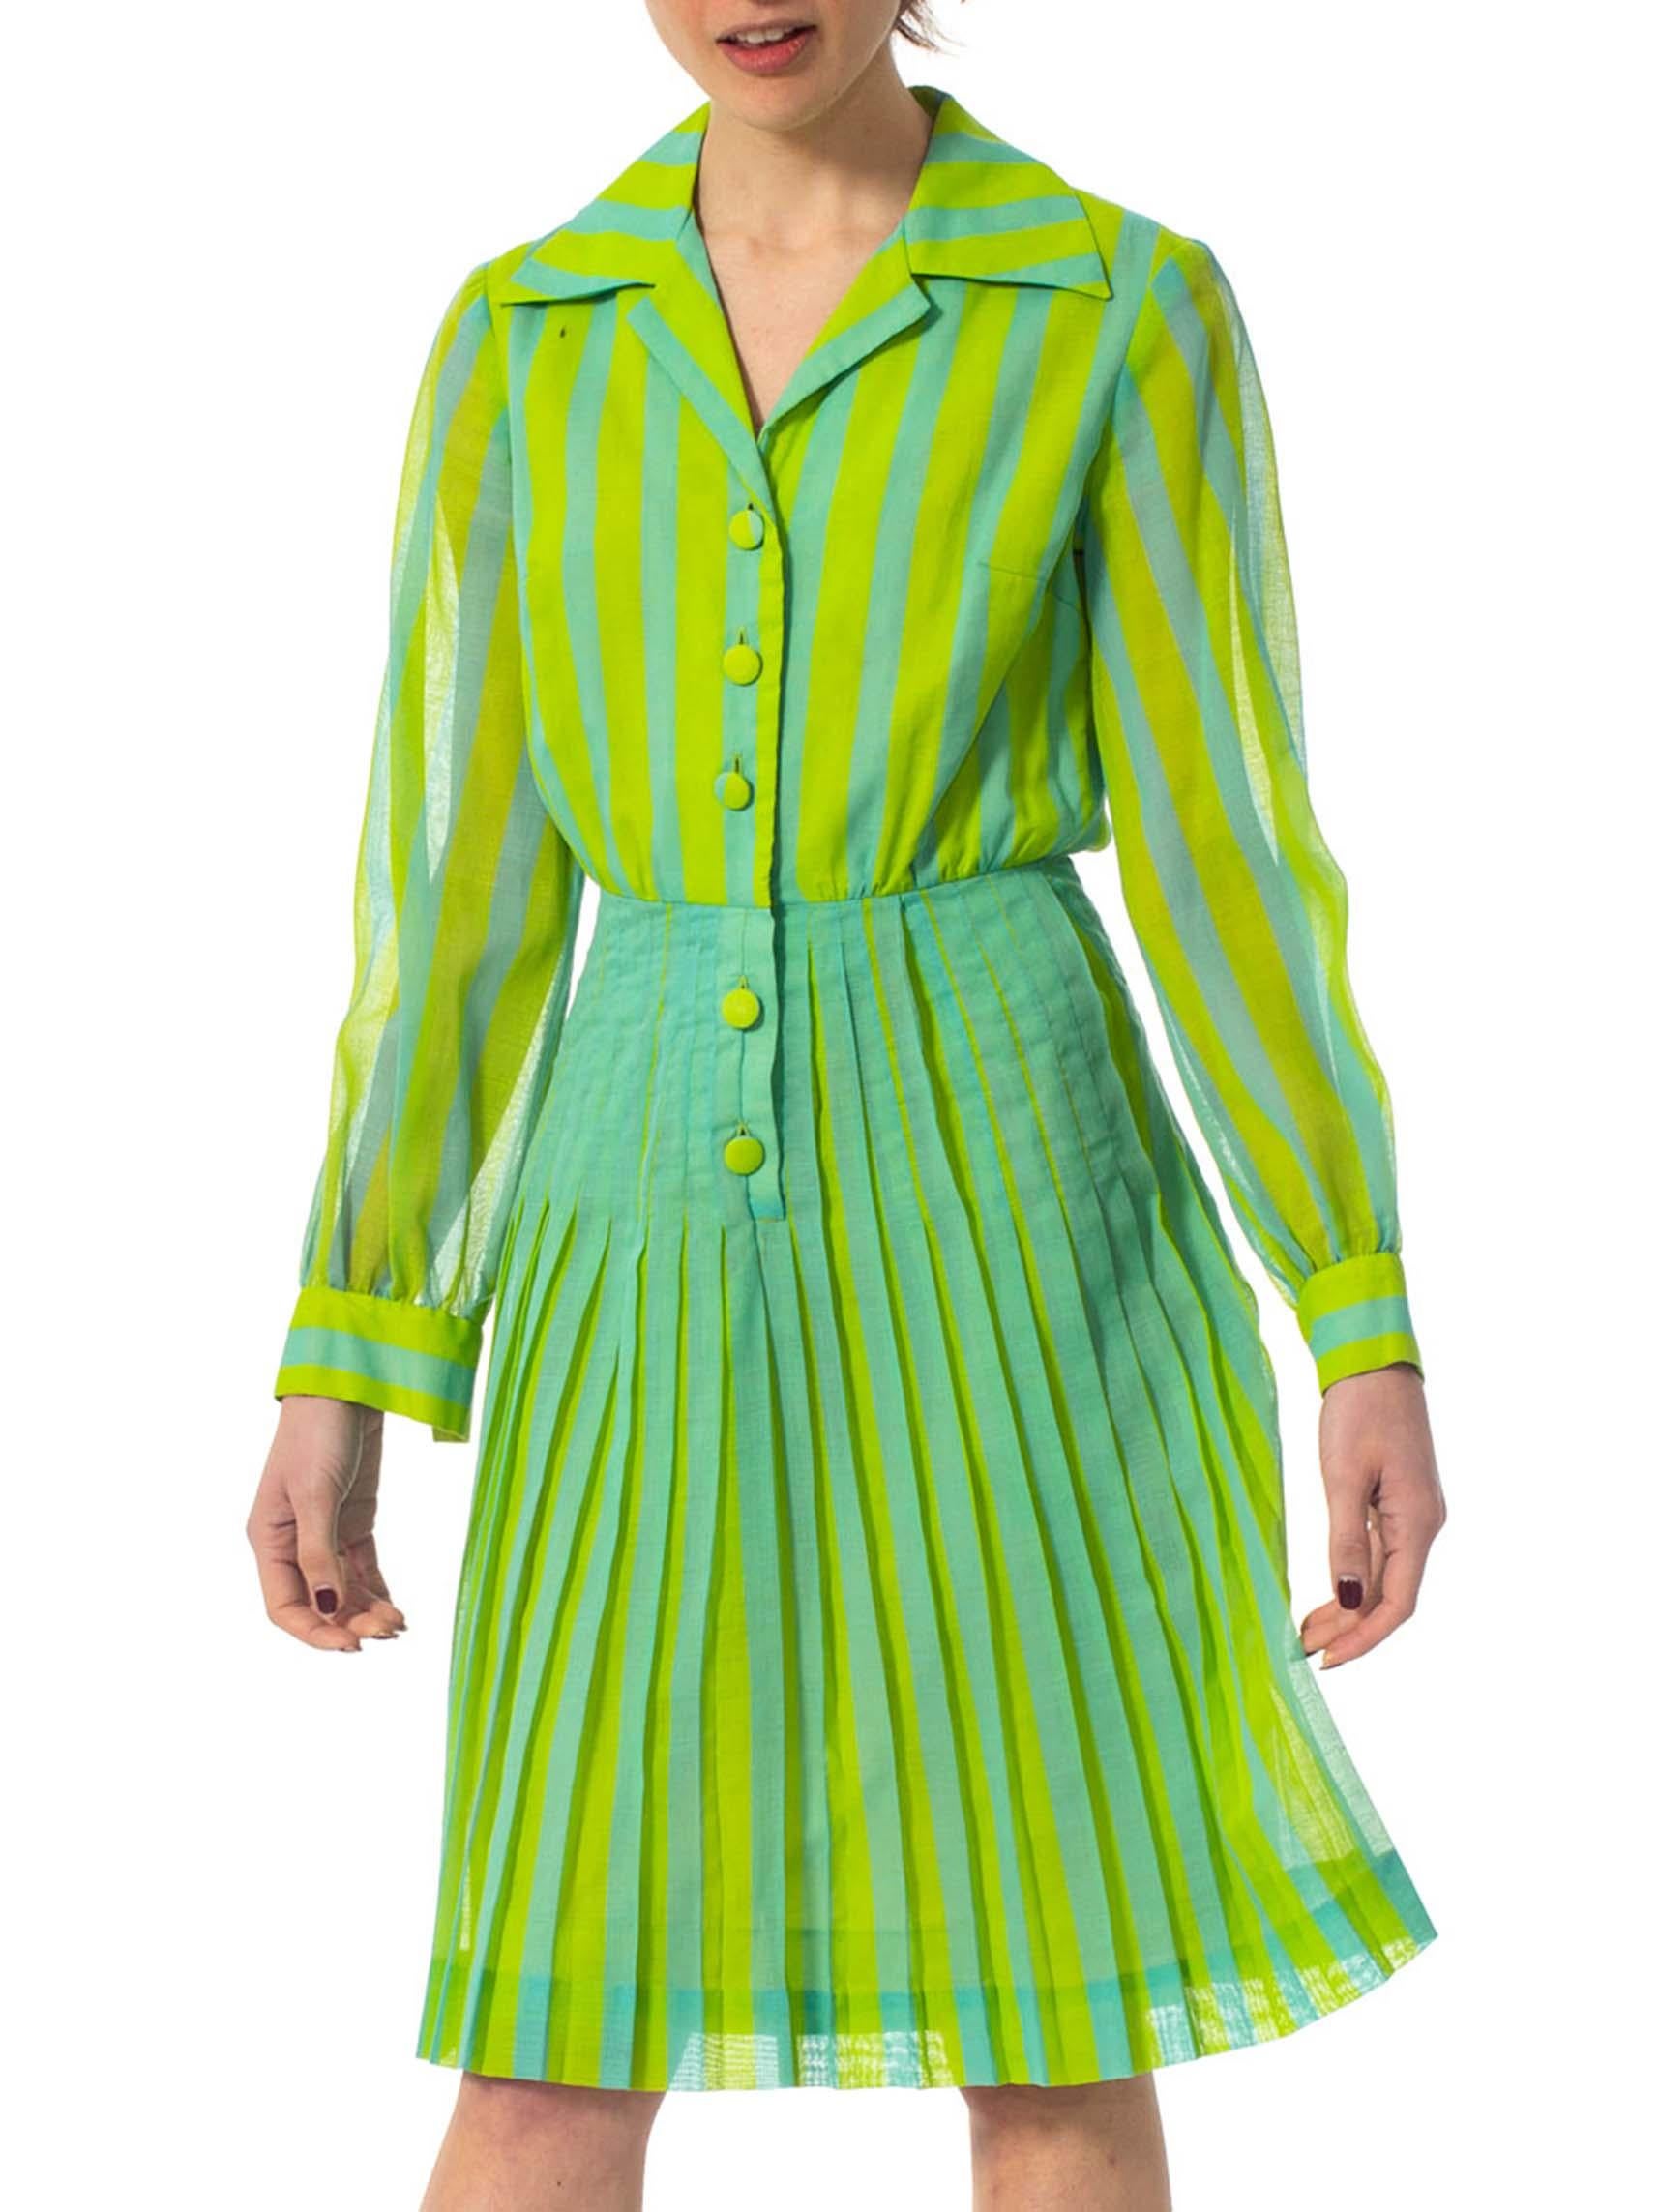 Women's 1970S DADDY DRADDY's Lime Green & Blue Cotton Striped Pleated Mod Dress For Sale